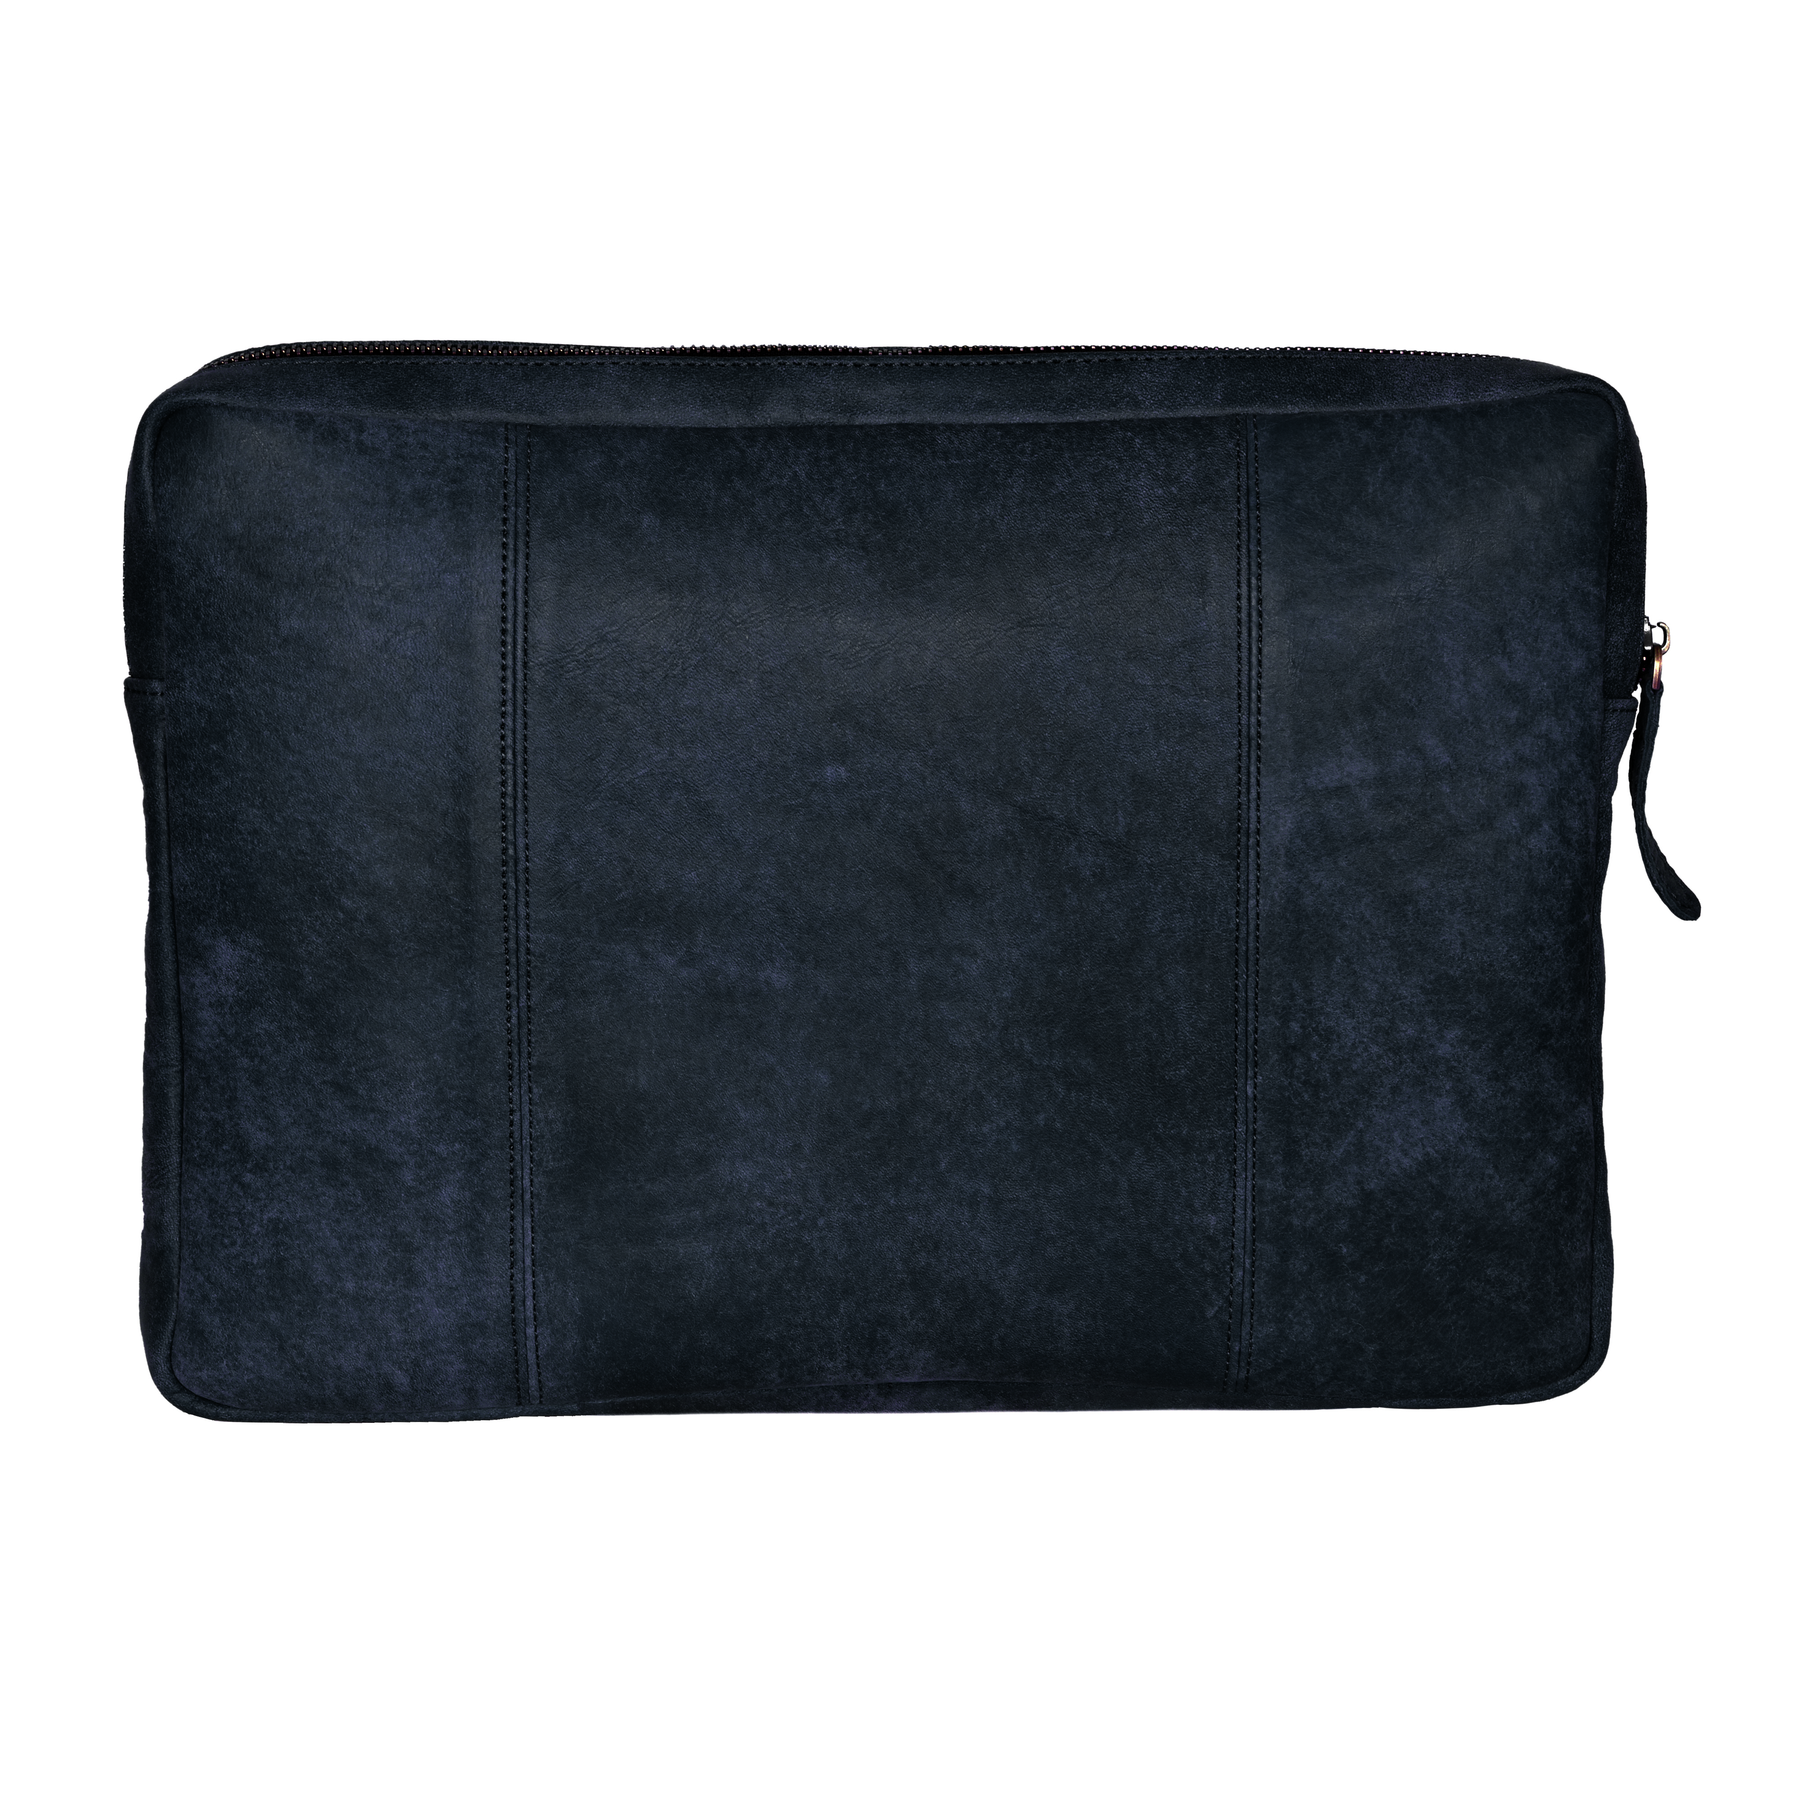 Leather Laptop Sleeve Black The Hague 15 inch